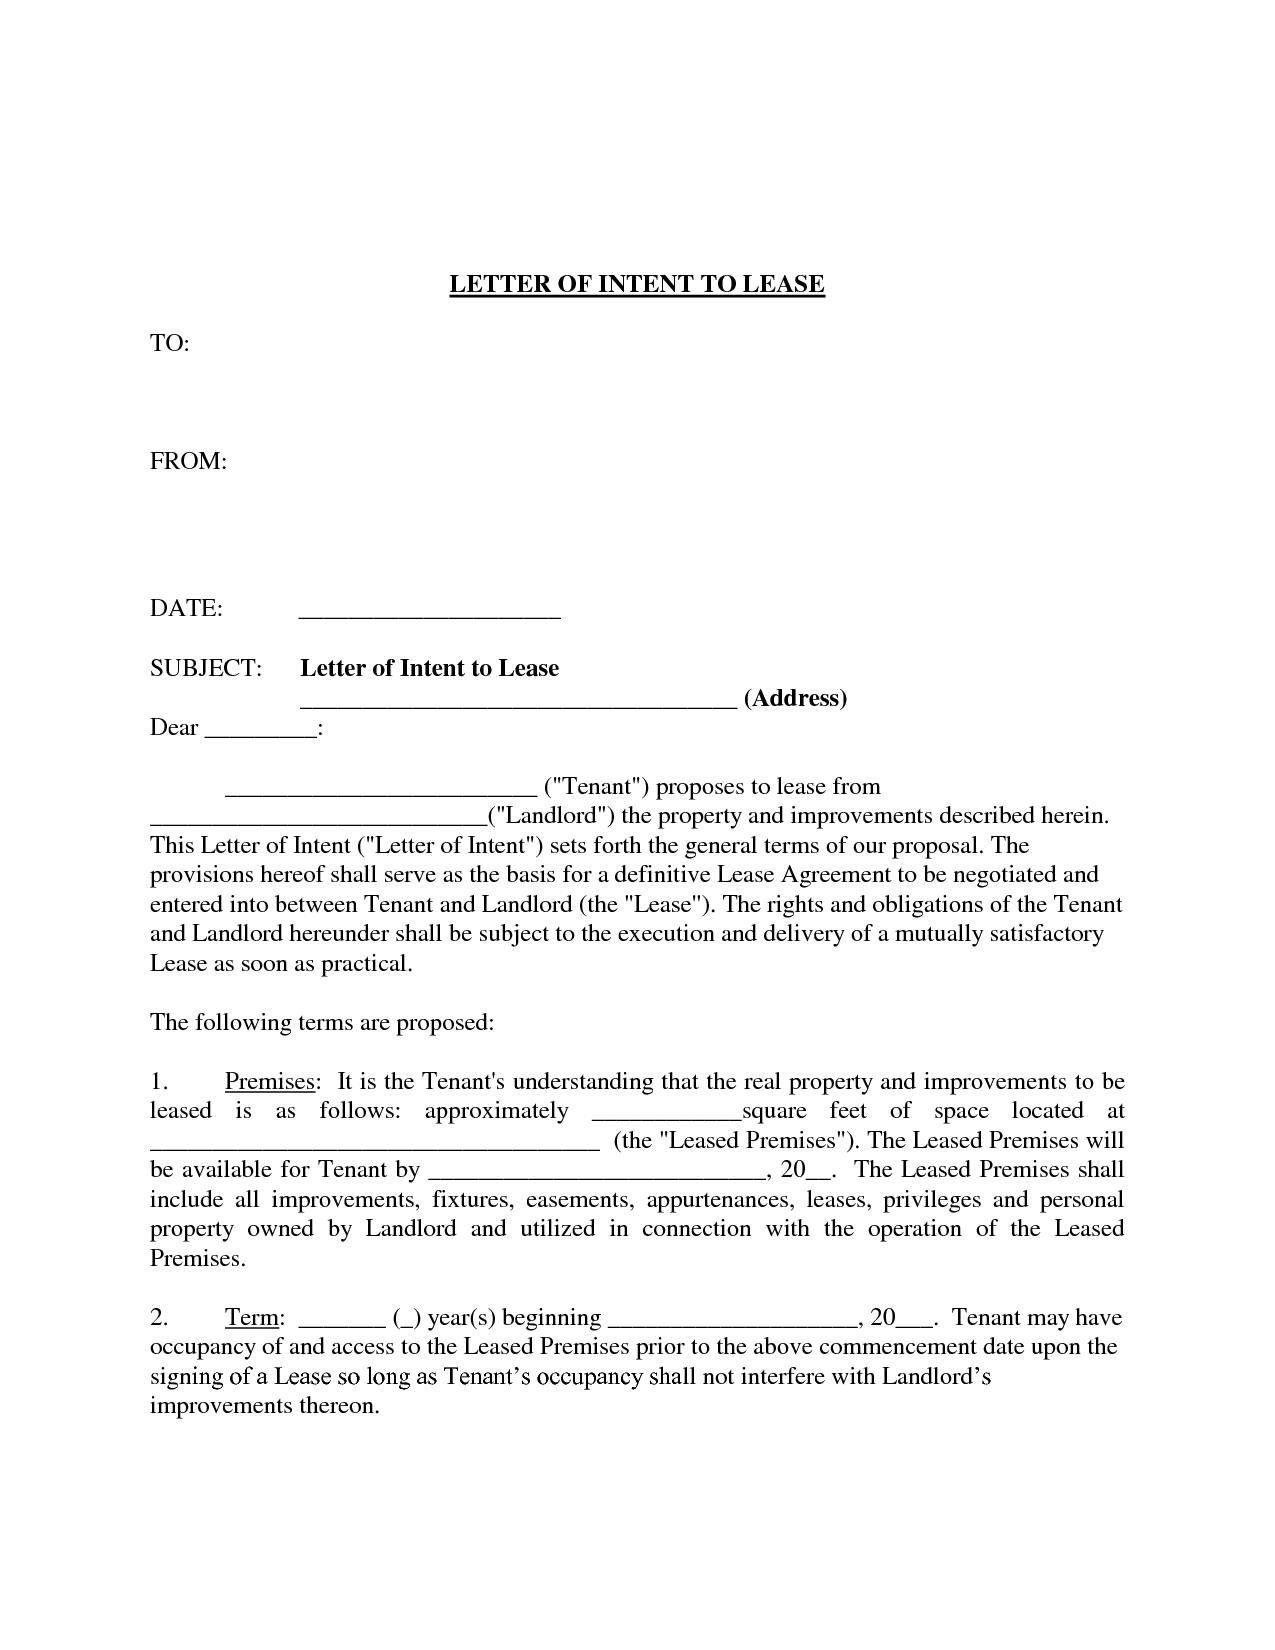 Letter Of Intent to Lease Commercial Space Template ...